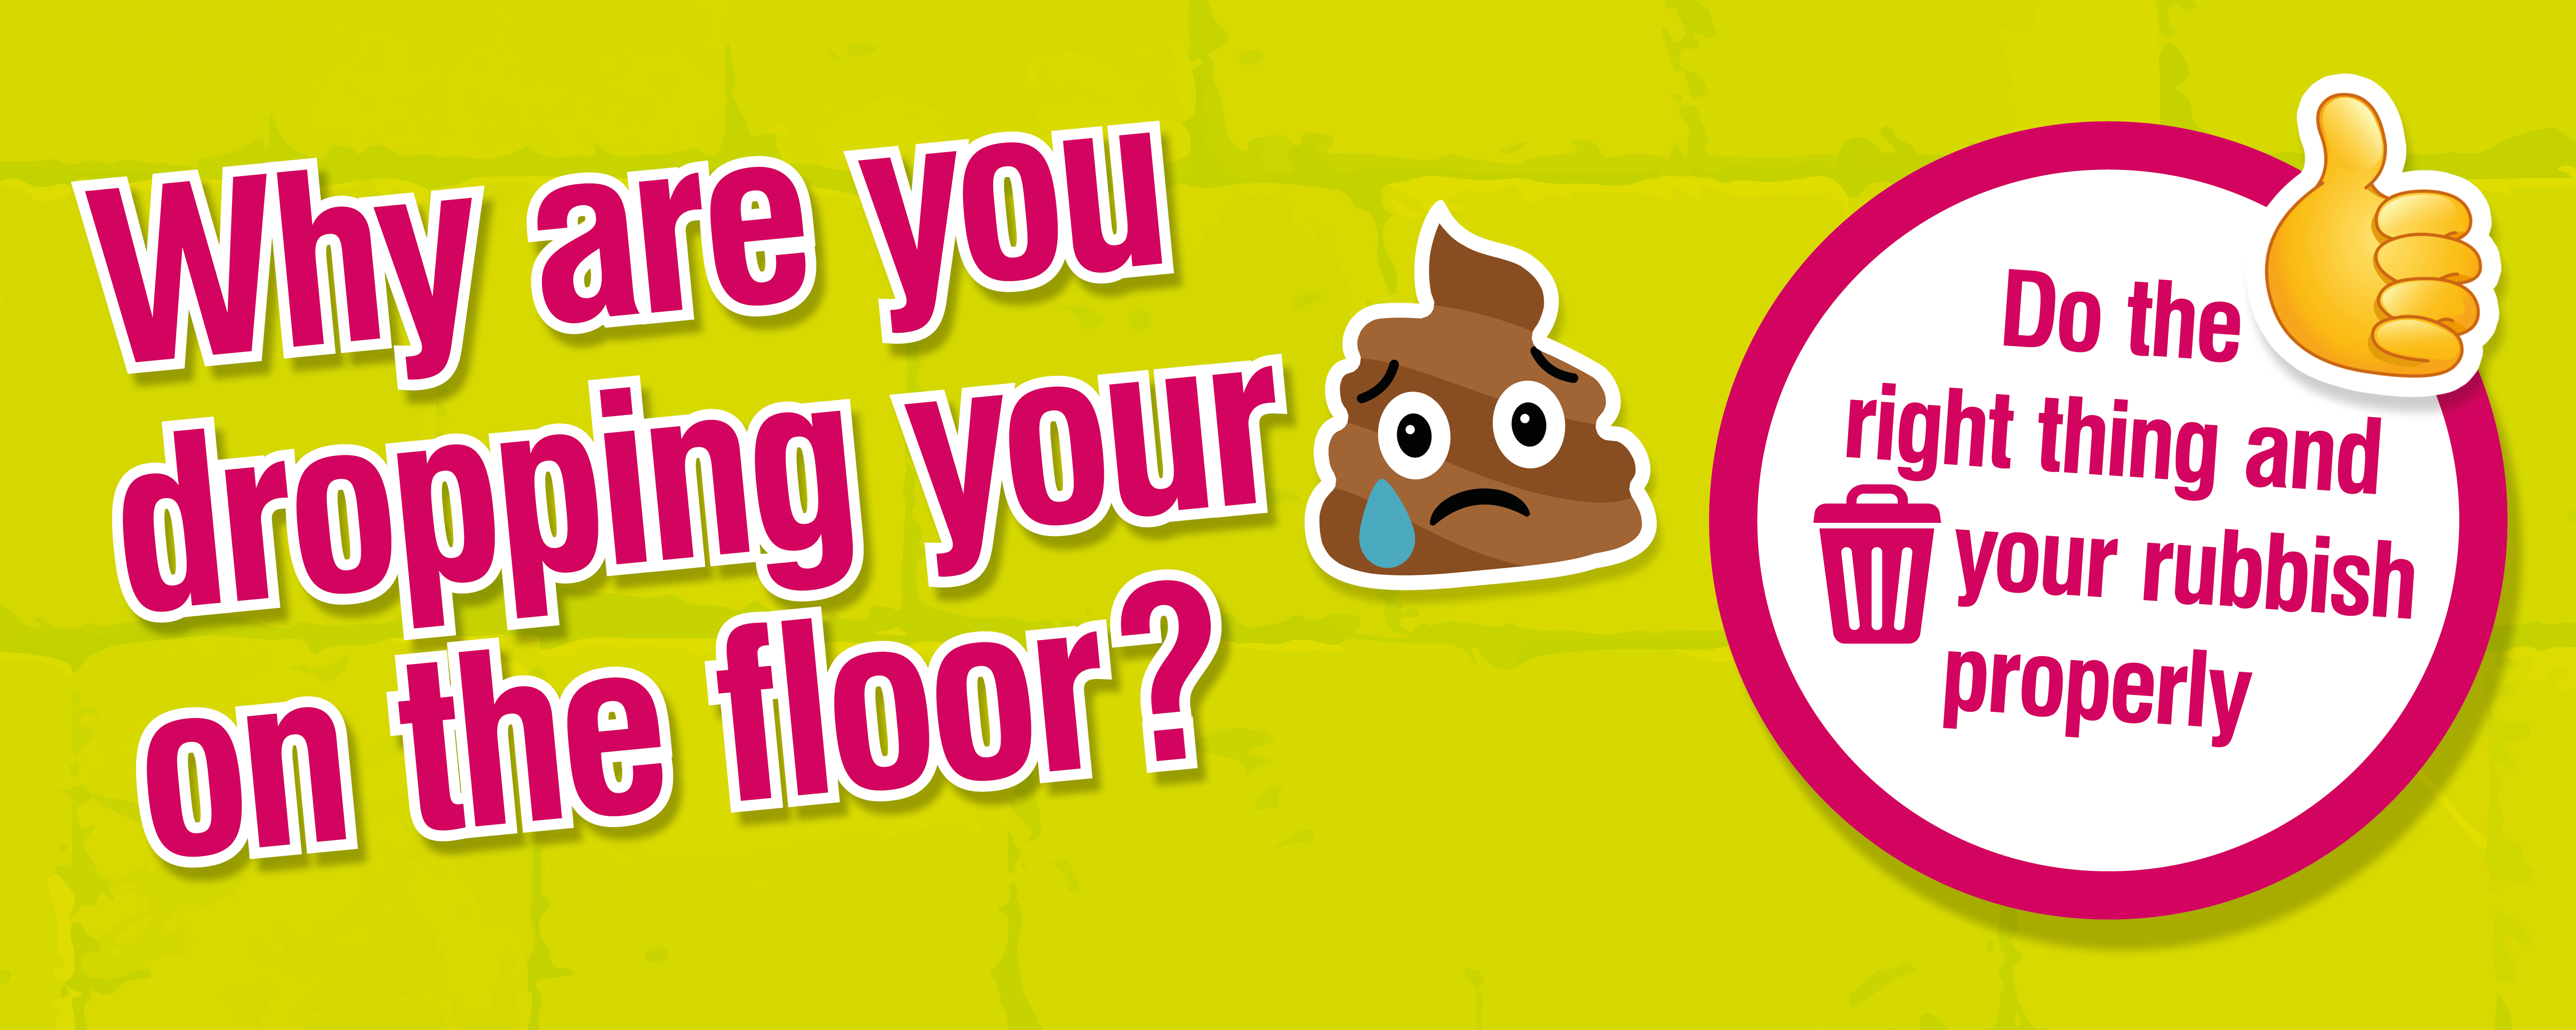 Why are you dropping your rubbish on the floor? Do the right thing and bin your rubbish properly